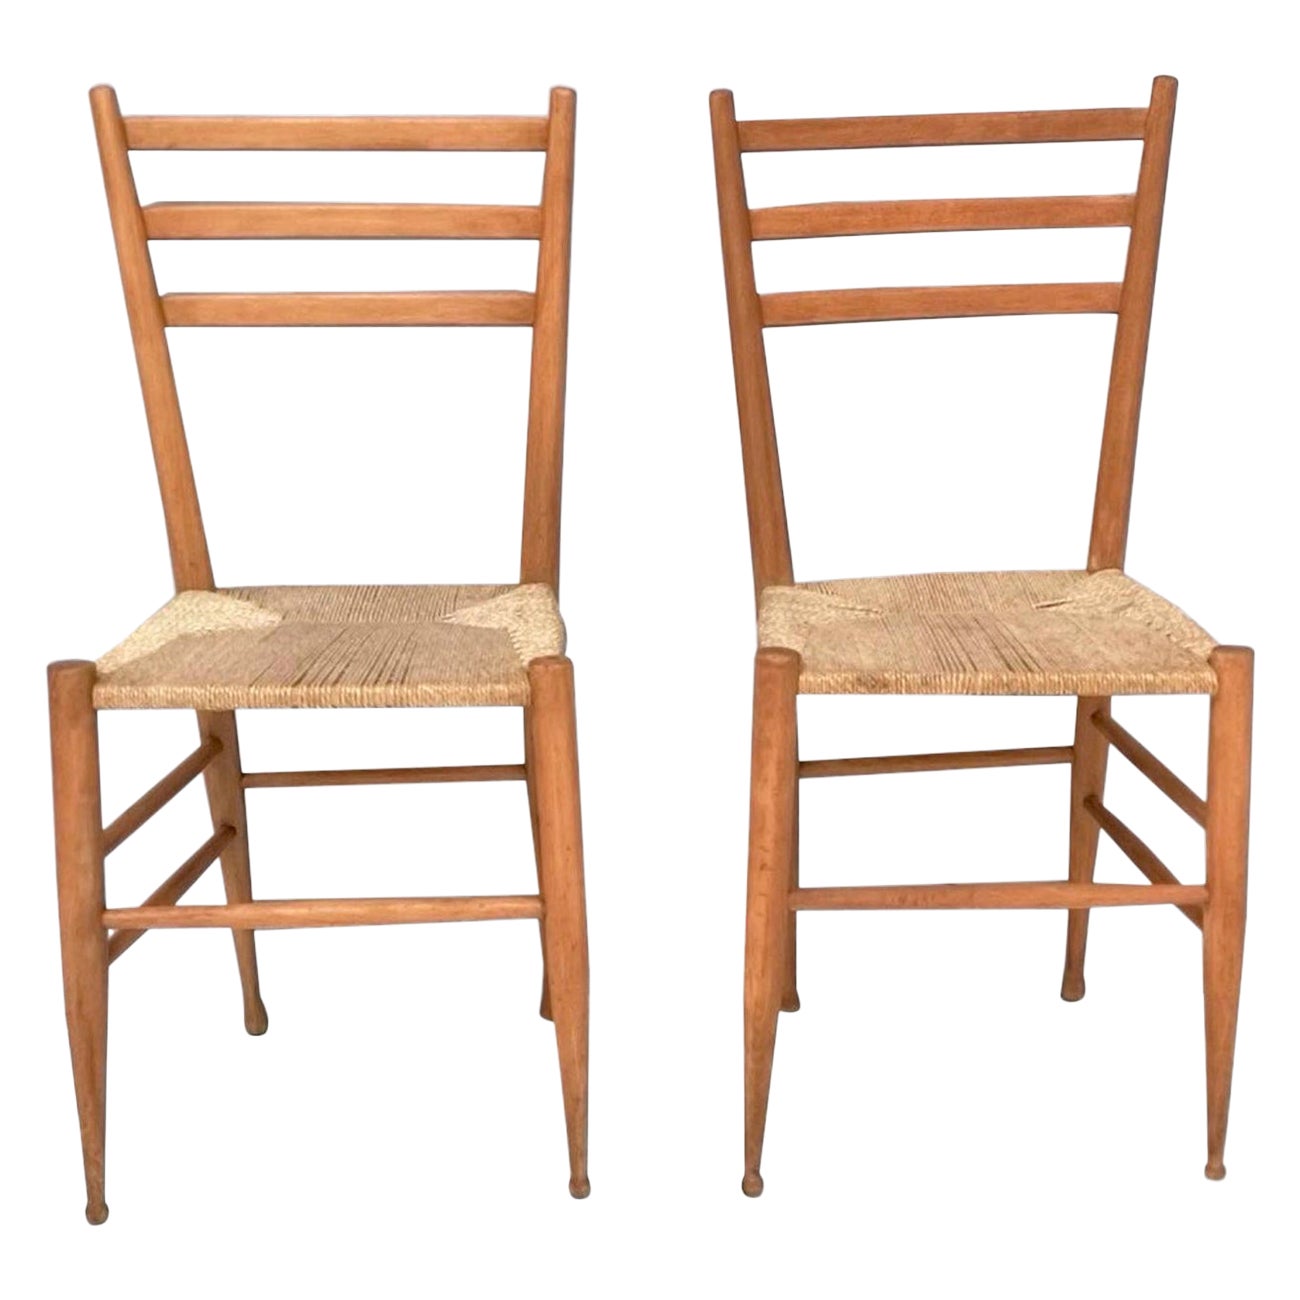 Pair of Vintage Beech Chiavarine Chairs with Slatted Backrest, Italy For Sale